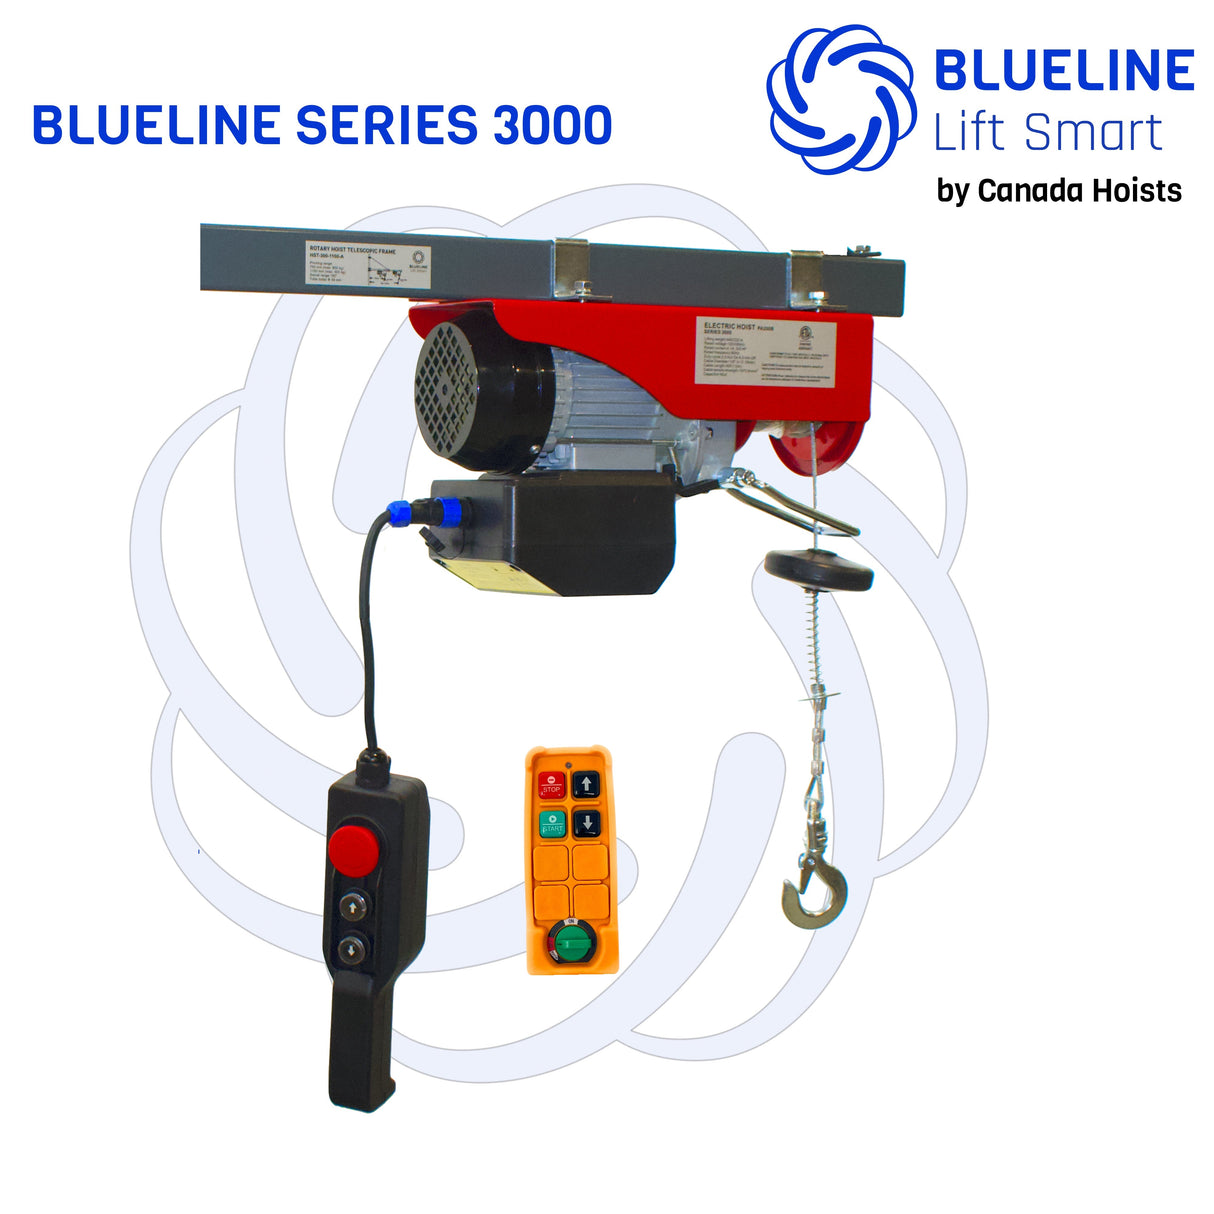 1320 lb (600kg) BLUELINE SERIES 3000 Electric Hoist with Wireless Remote Control + 20FT Wired Remote Control